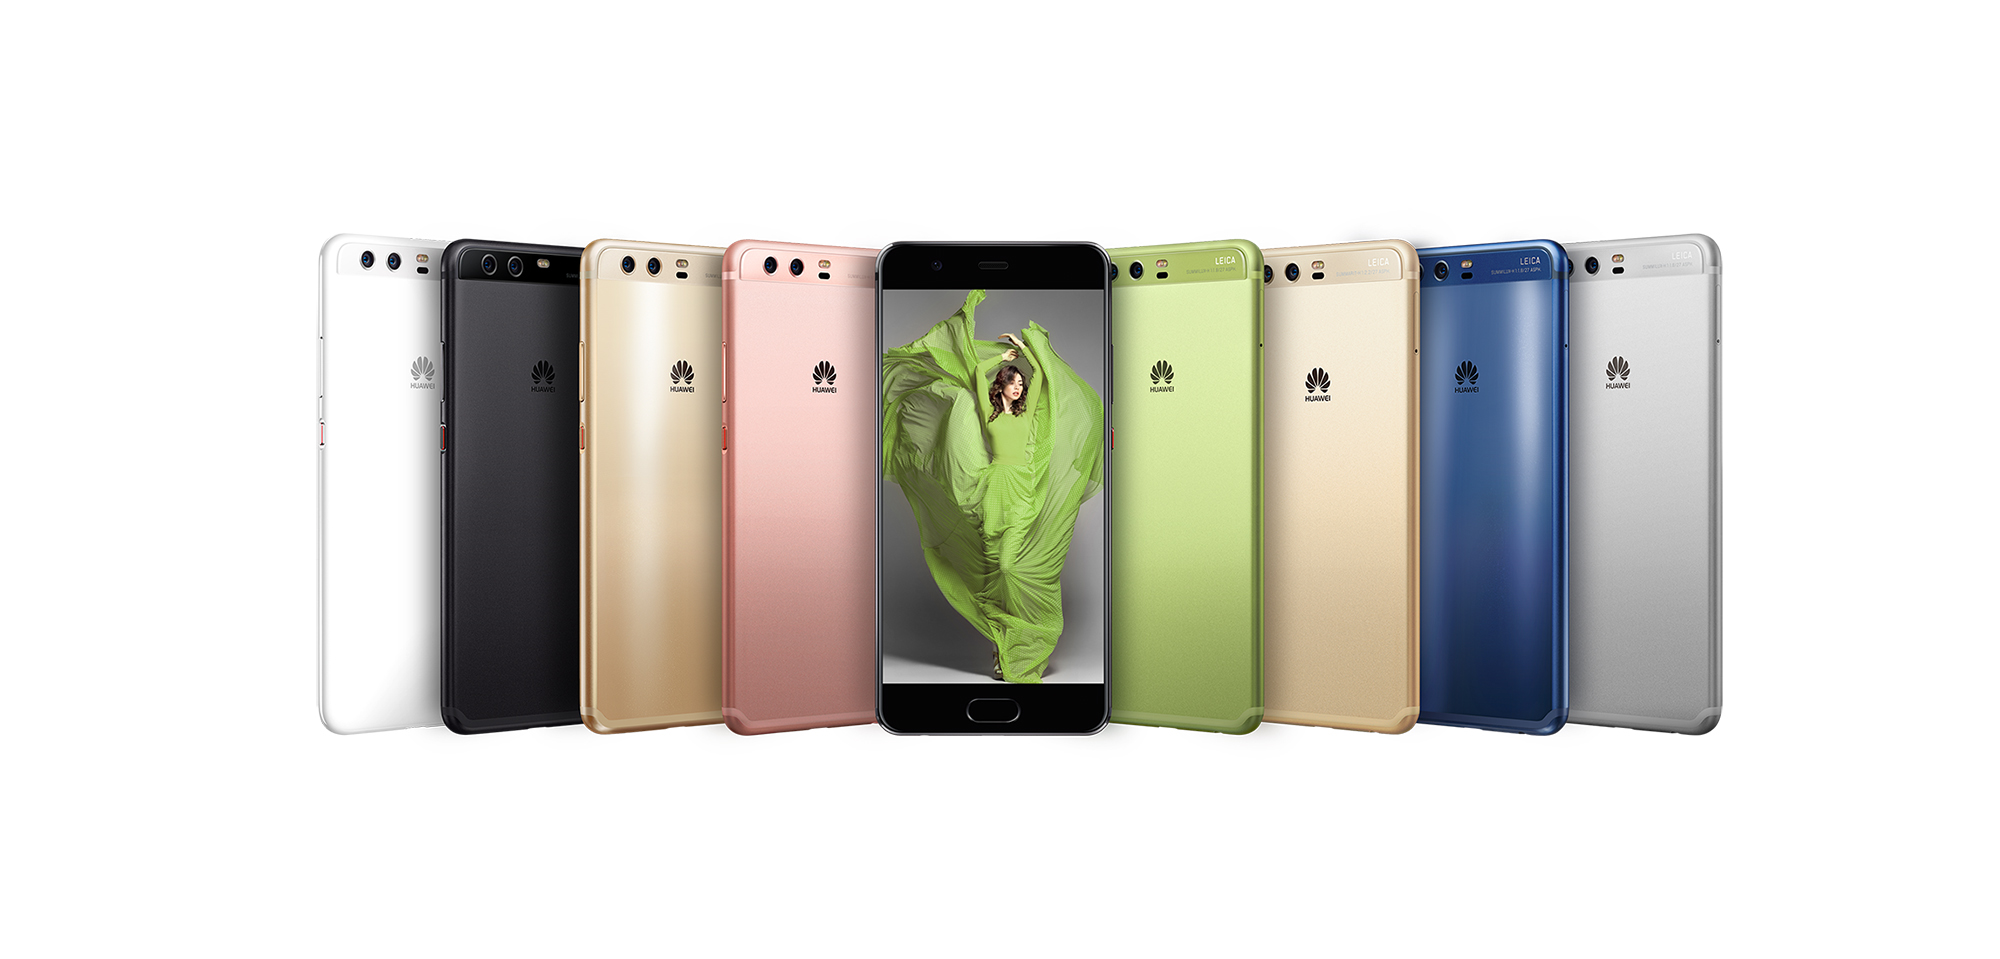 MWC 2017: Huawei Announces P10 and P10 Plus